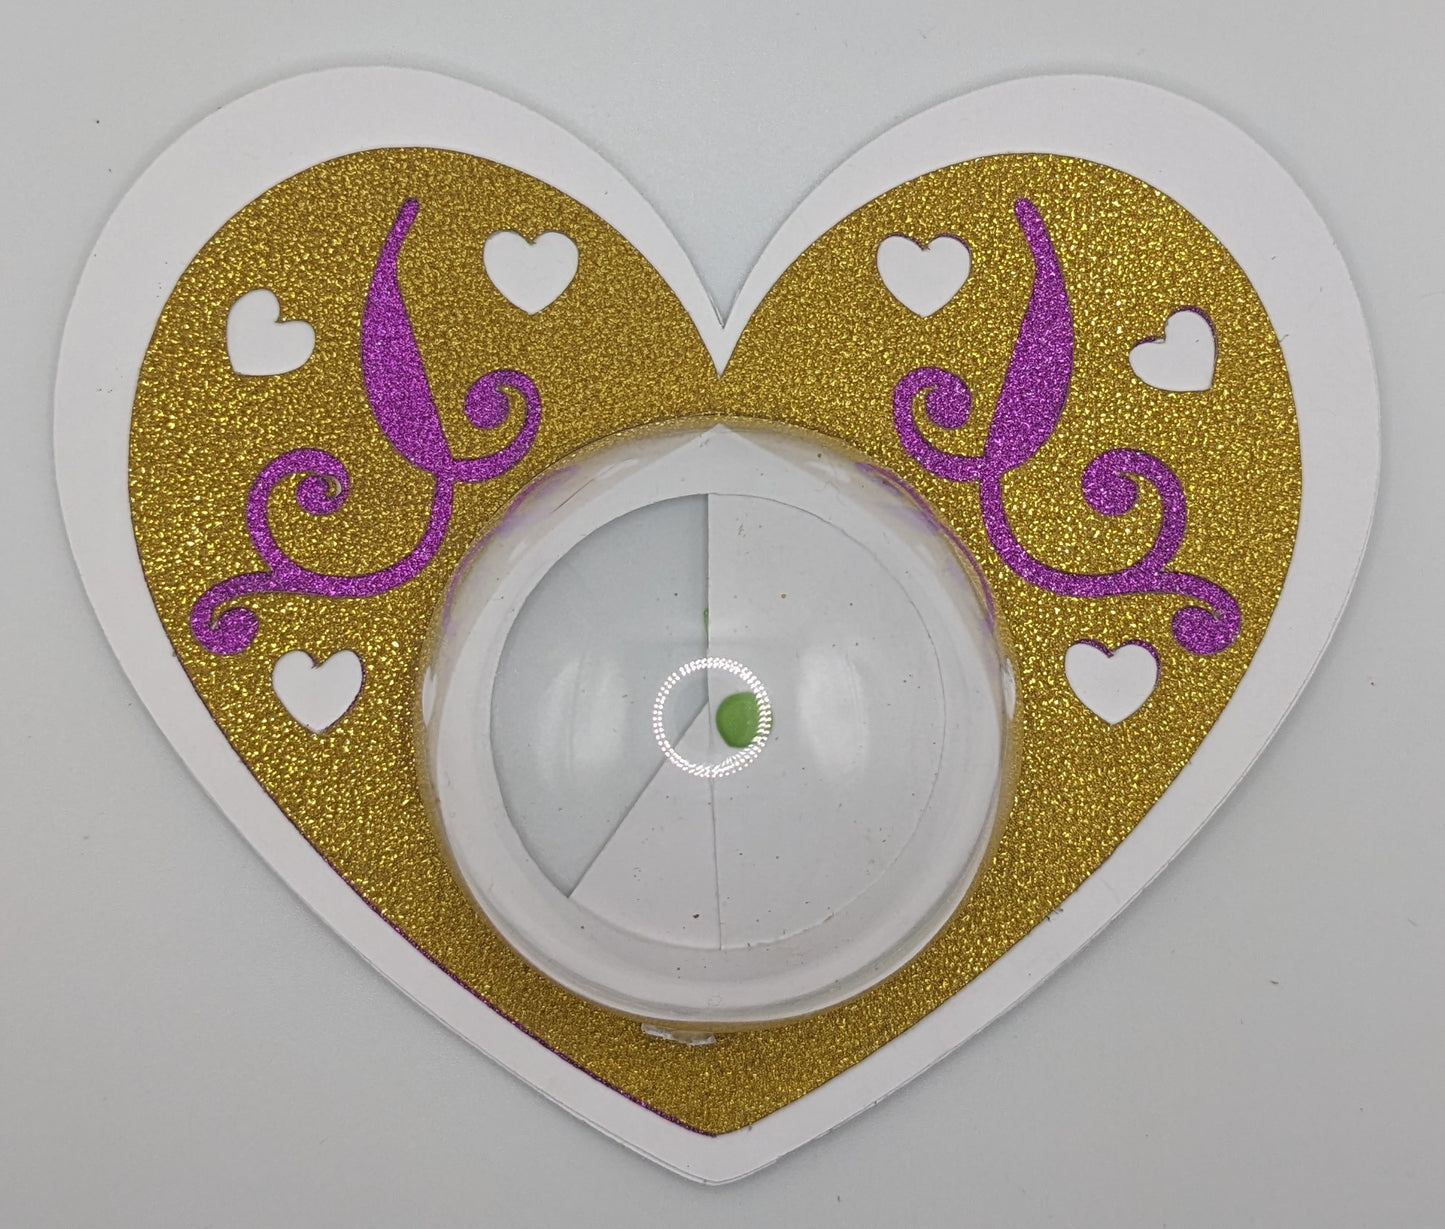 Refillable Gitter Heart Dome with Dog Treats